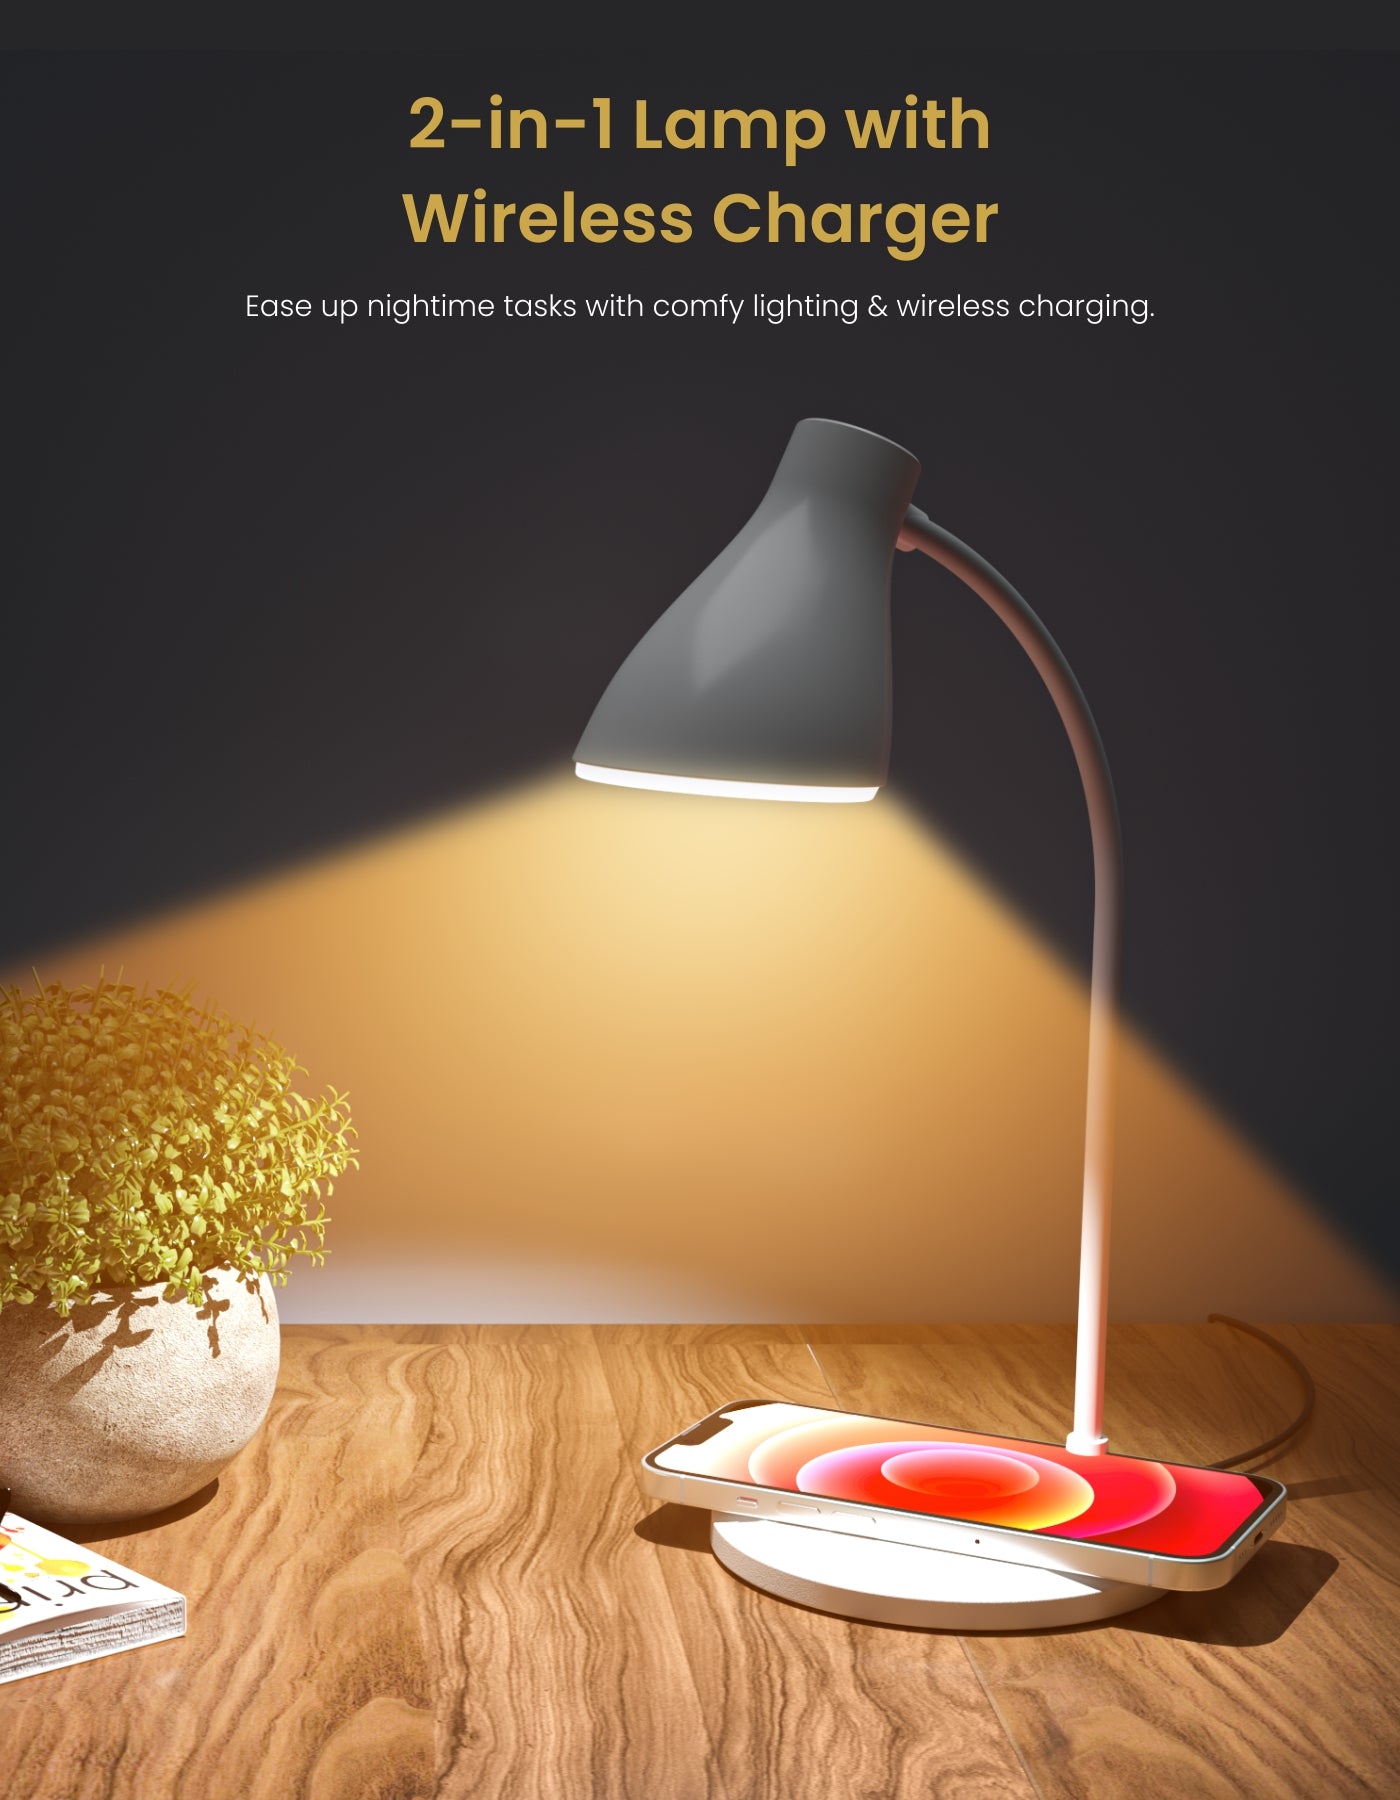 Brillo 3 - 2-in-1 Wireless Charger Lamp With 10W Wireless Fast Charger